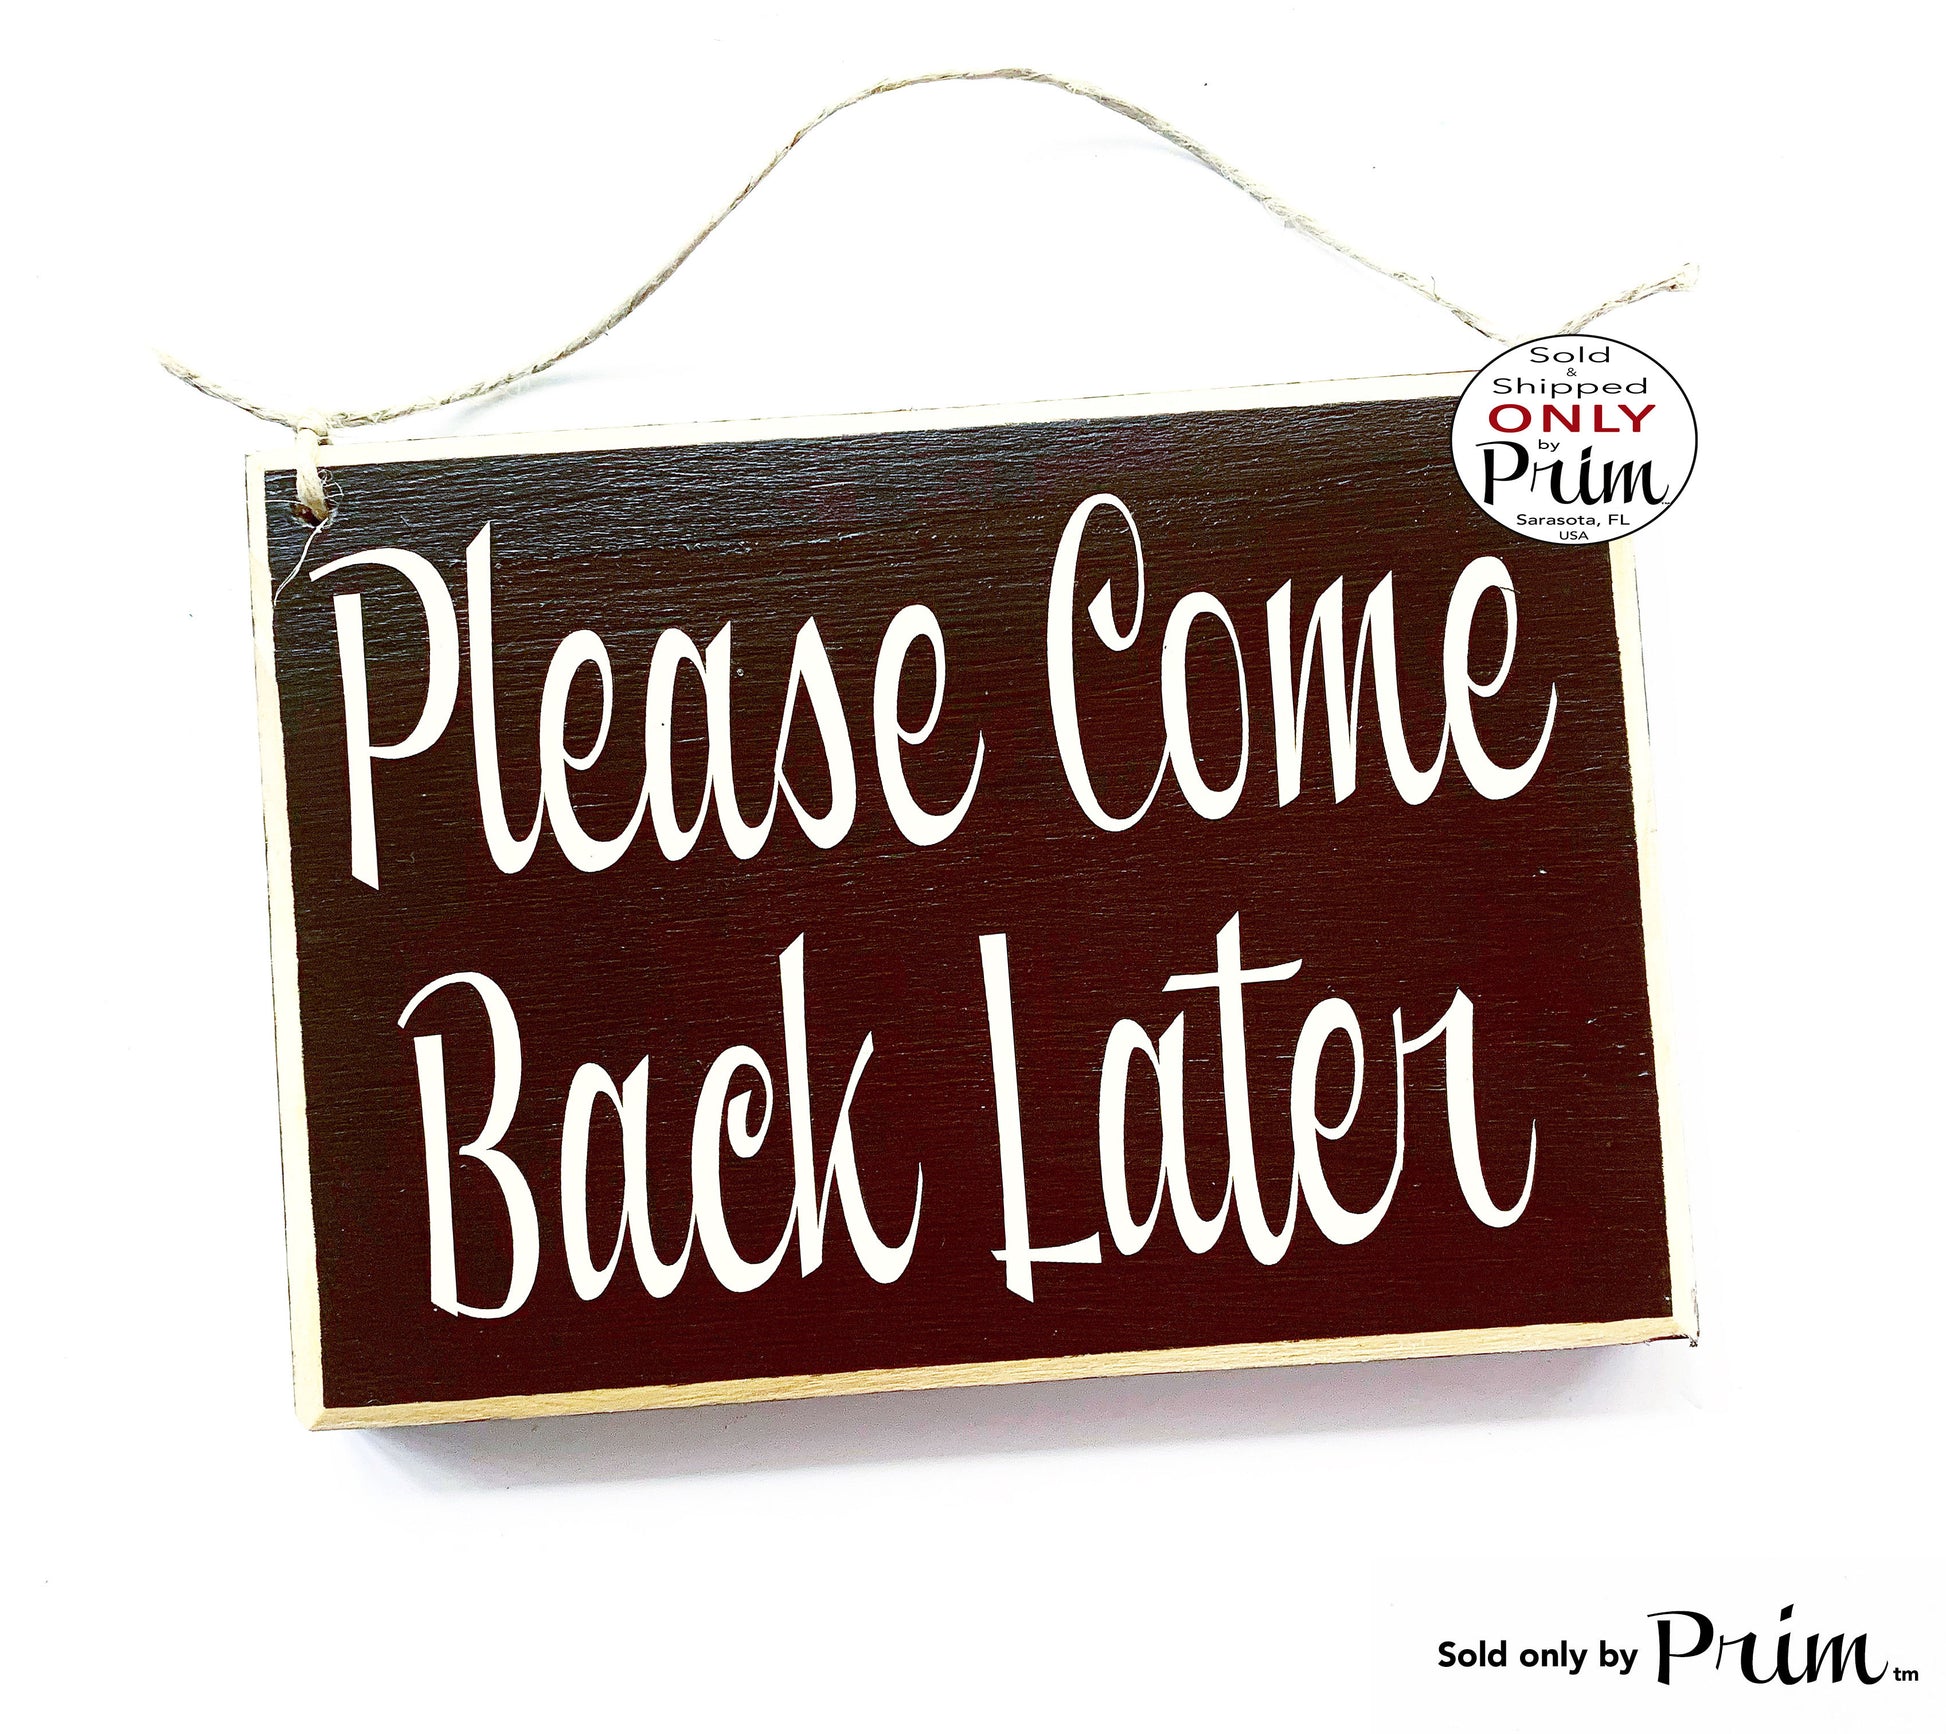 8x6 Please Come Back Later Custom Wood | In Session Progress Meeting Do Not Disturb Office Business Private Wall Decor Door Hanger Plaque Designs by Prim